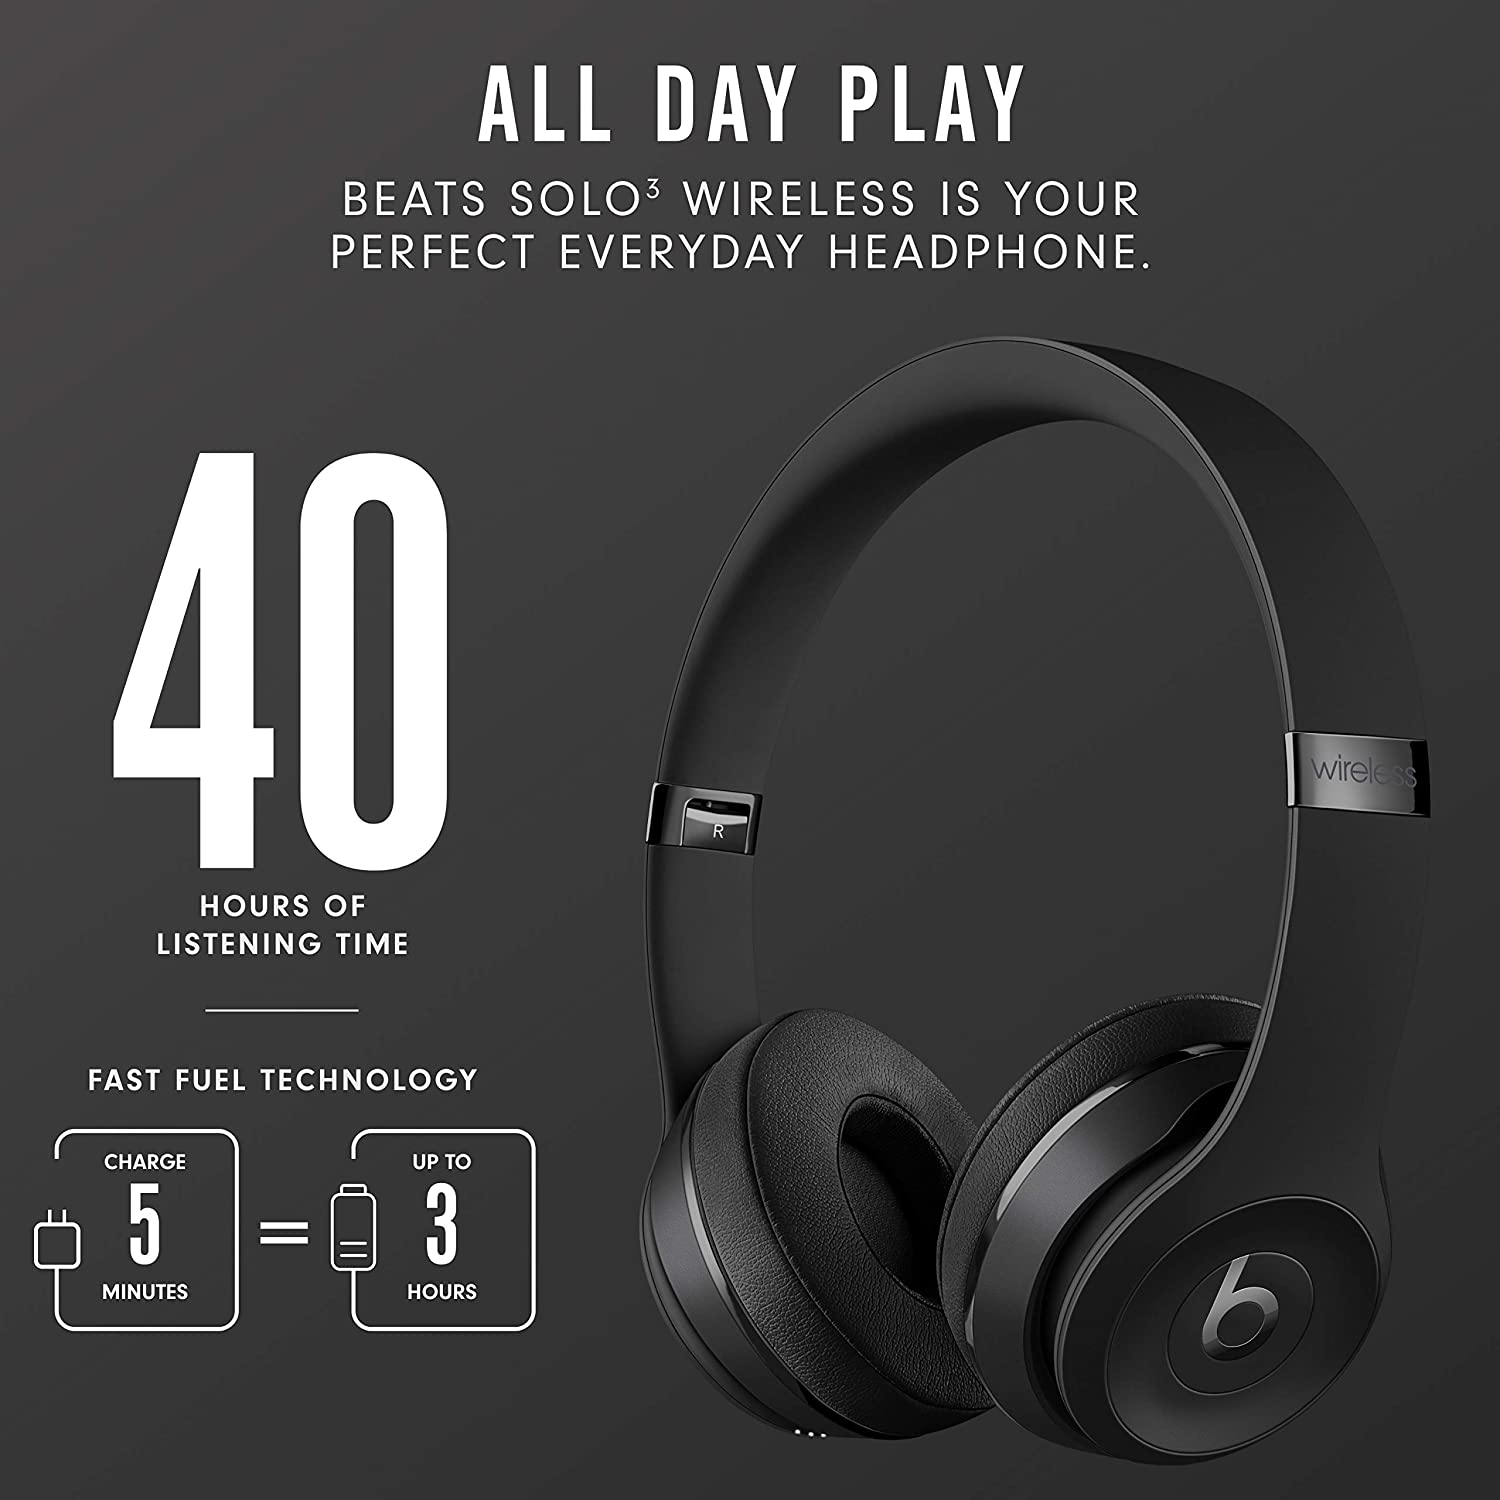 Solo3 Wireless On-Ear Headphones - Apple W1 Headphone Chip, Class 1 Bluetooth, 40 Hours of Listening Time, Built-In Microphone - Black (Latest Model)